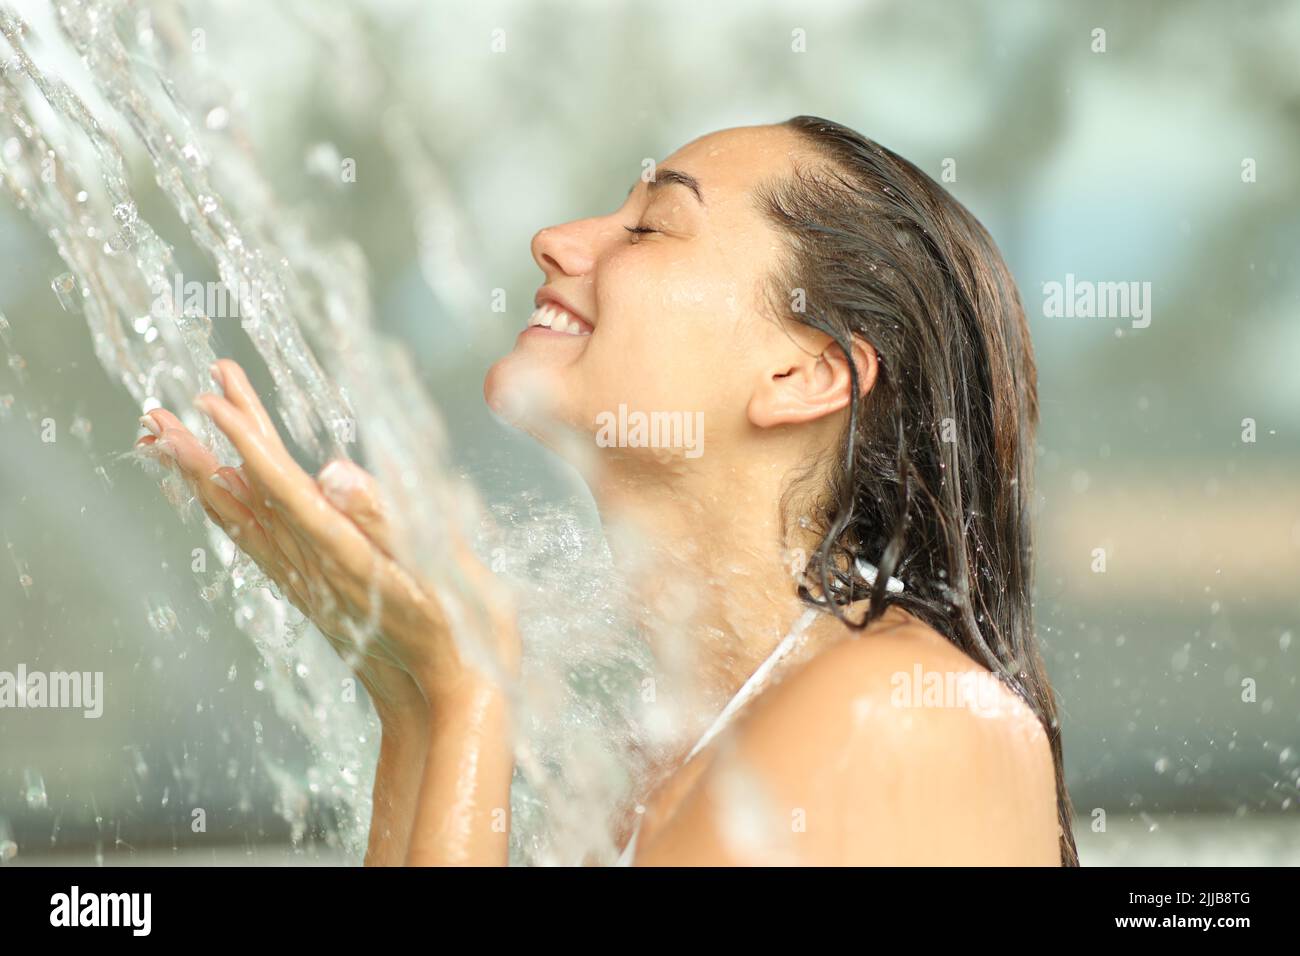 Profile of a happy woman enjoying of water jet in spa Stock Photo